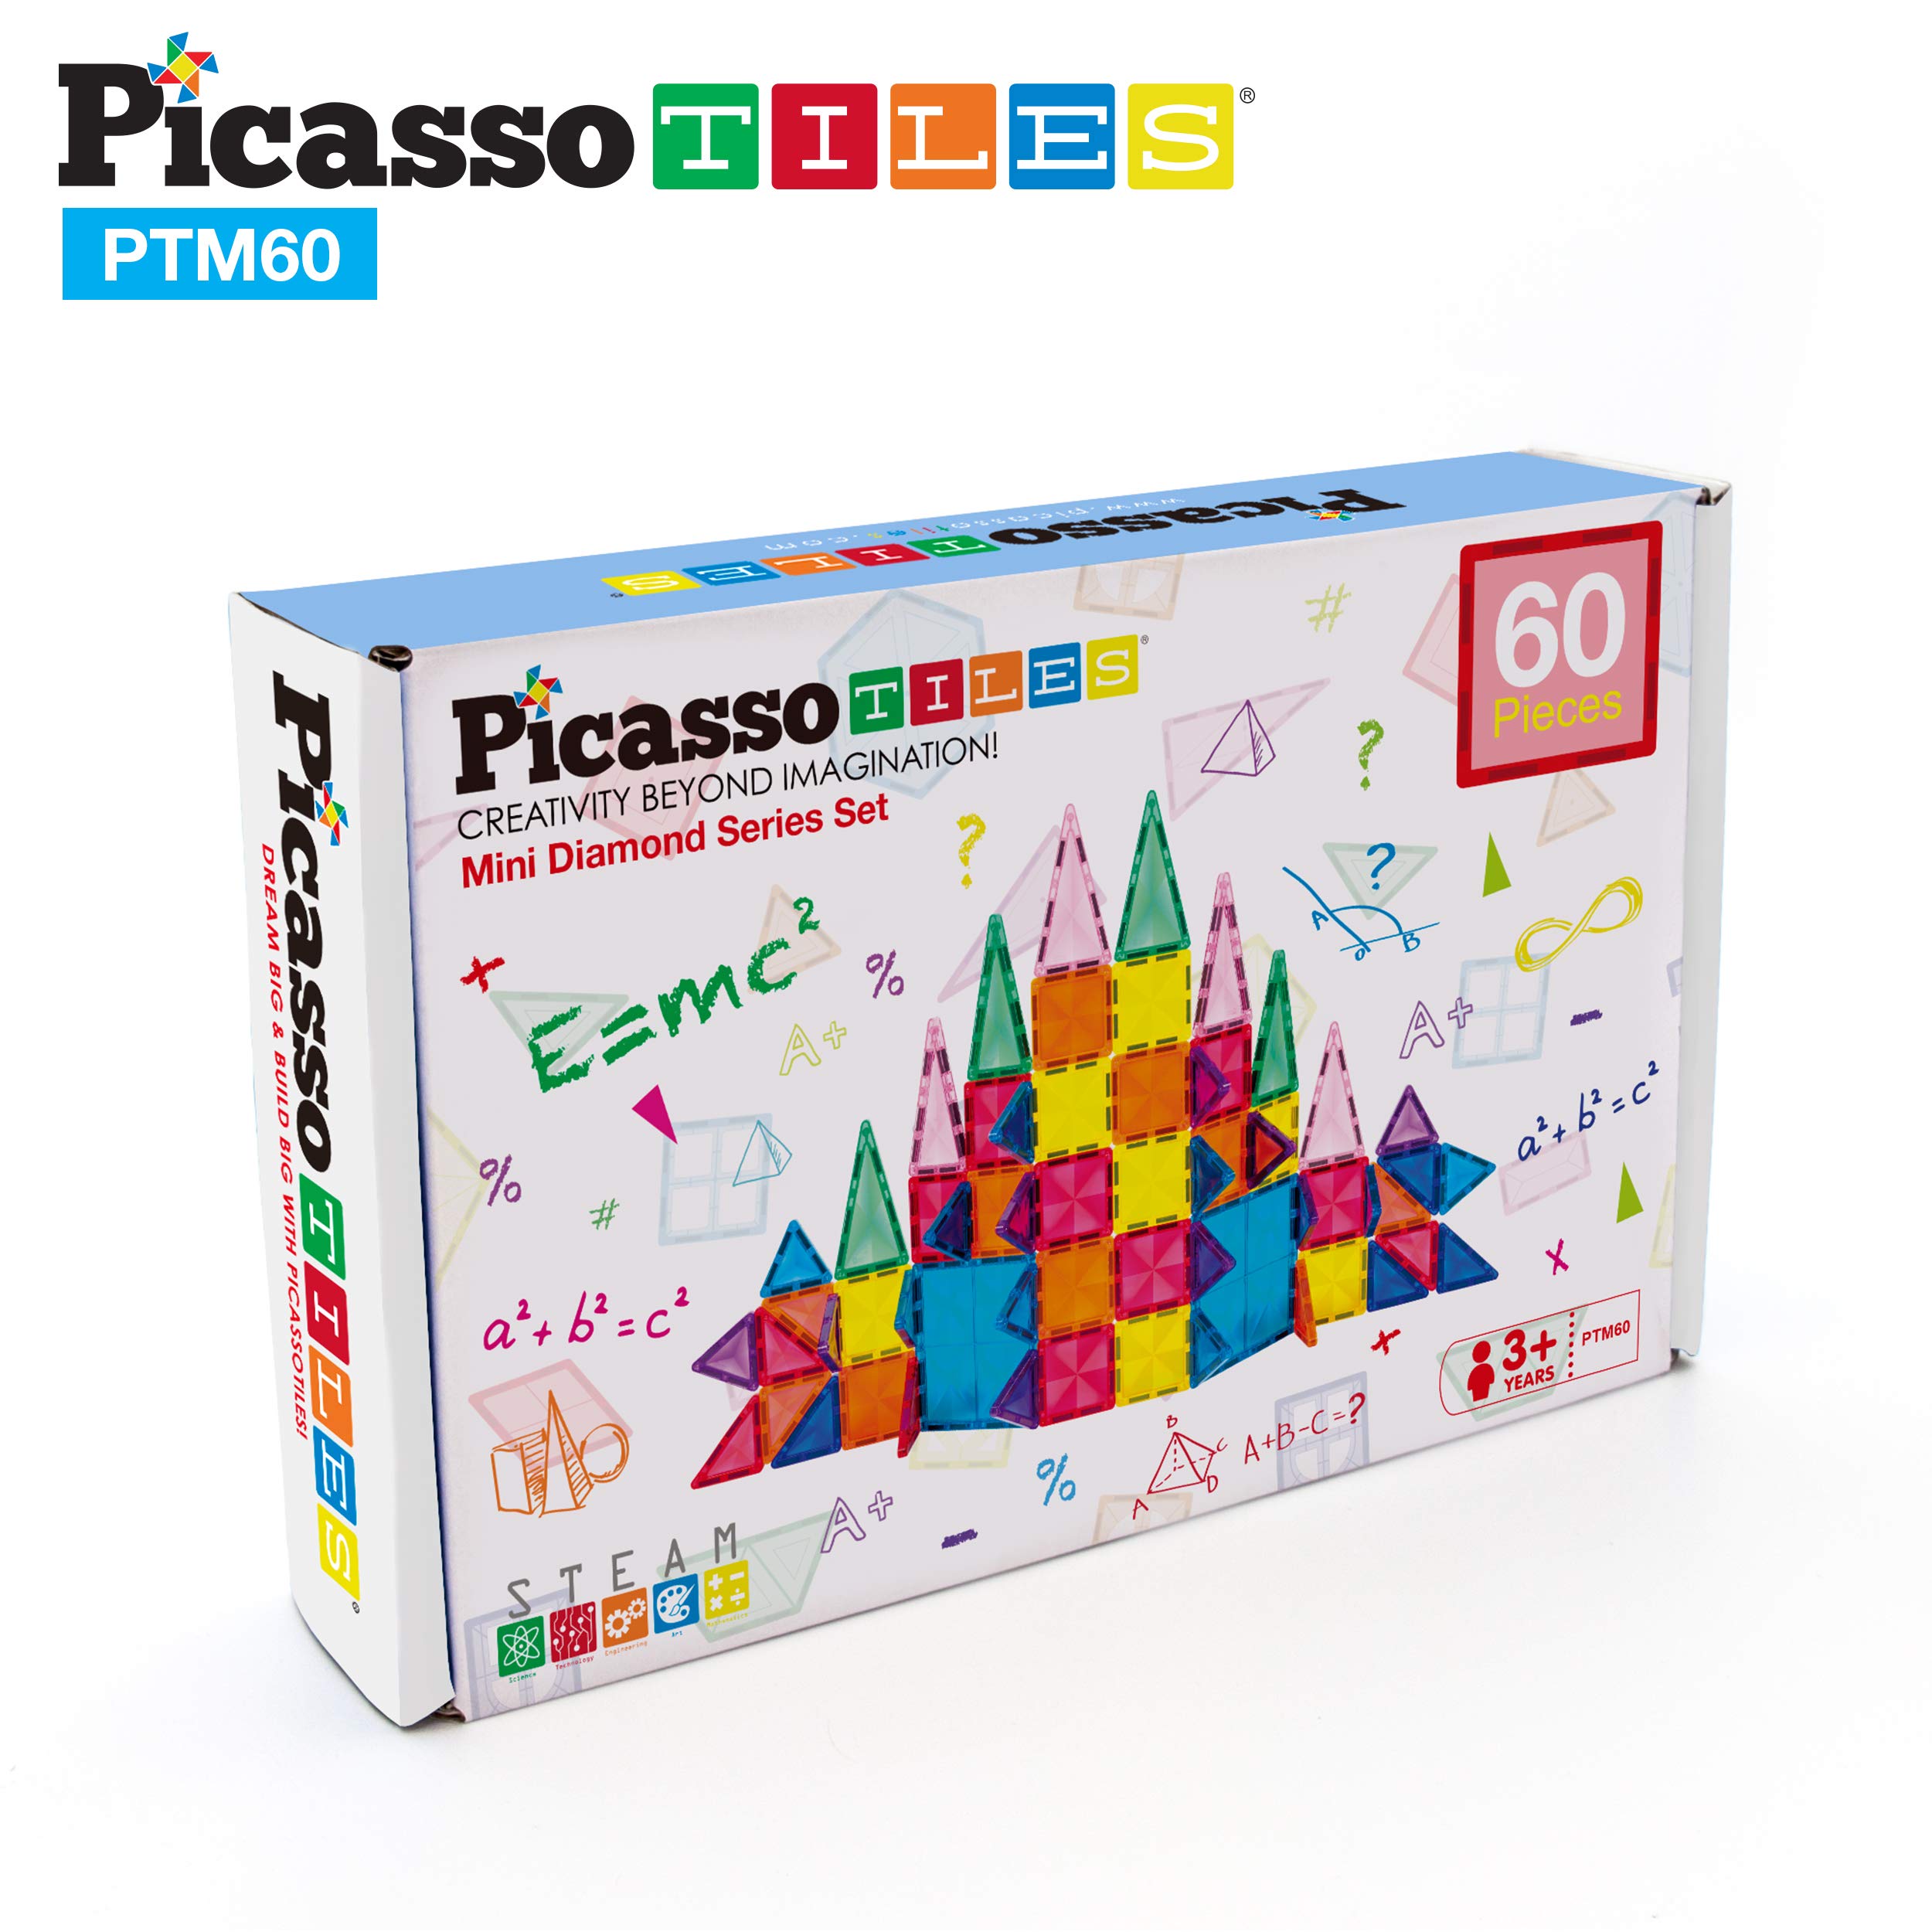 PicassoTiles 60 Piece Magnetic Building Block Mini Diamond Series Travel Size On-The-Go Magnet Construction Toy Set STEM Learning Kit Educational Playset Child Brain Development Stacking Blocks PTM60